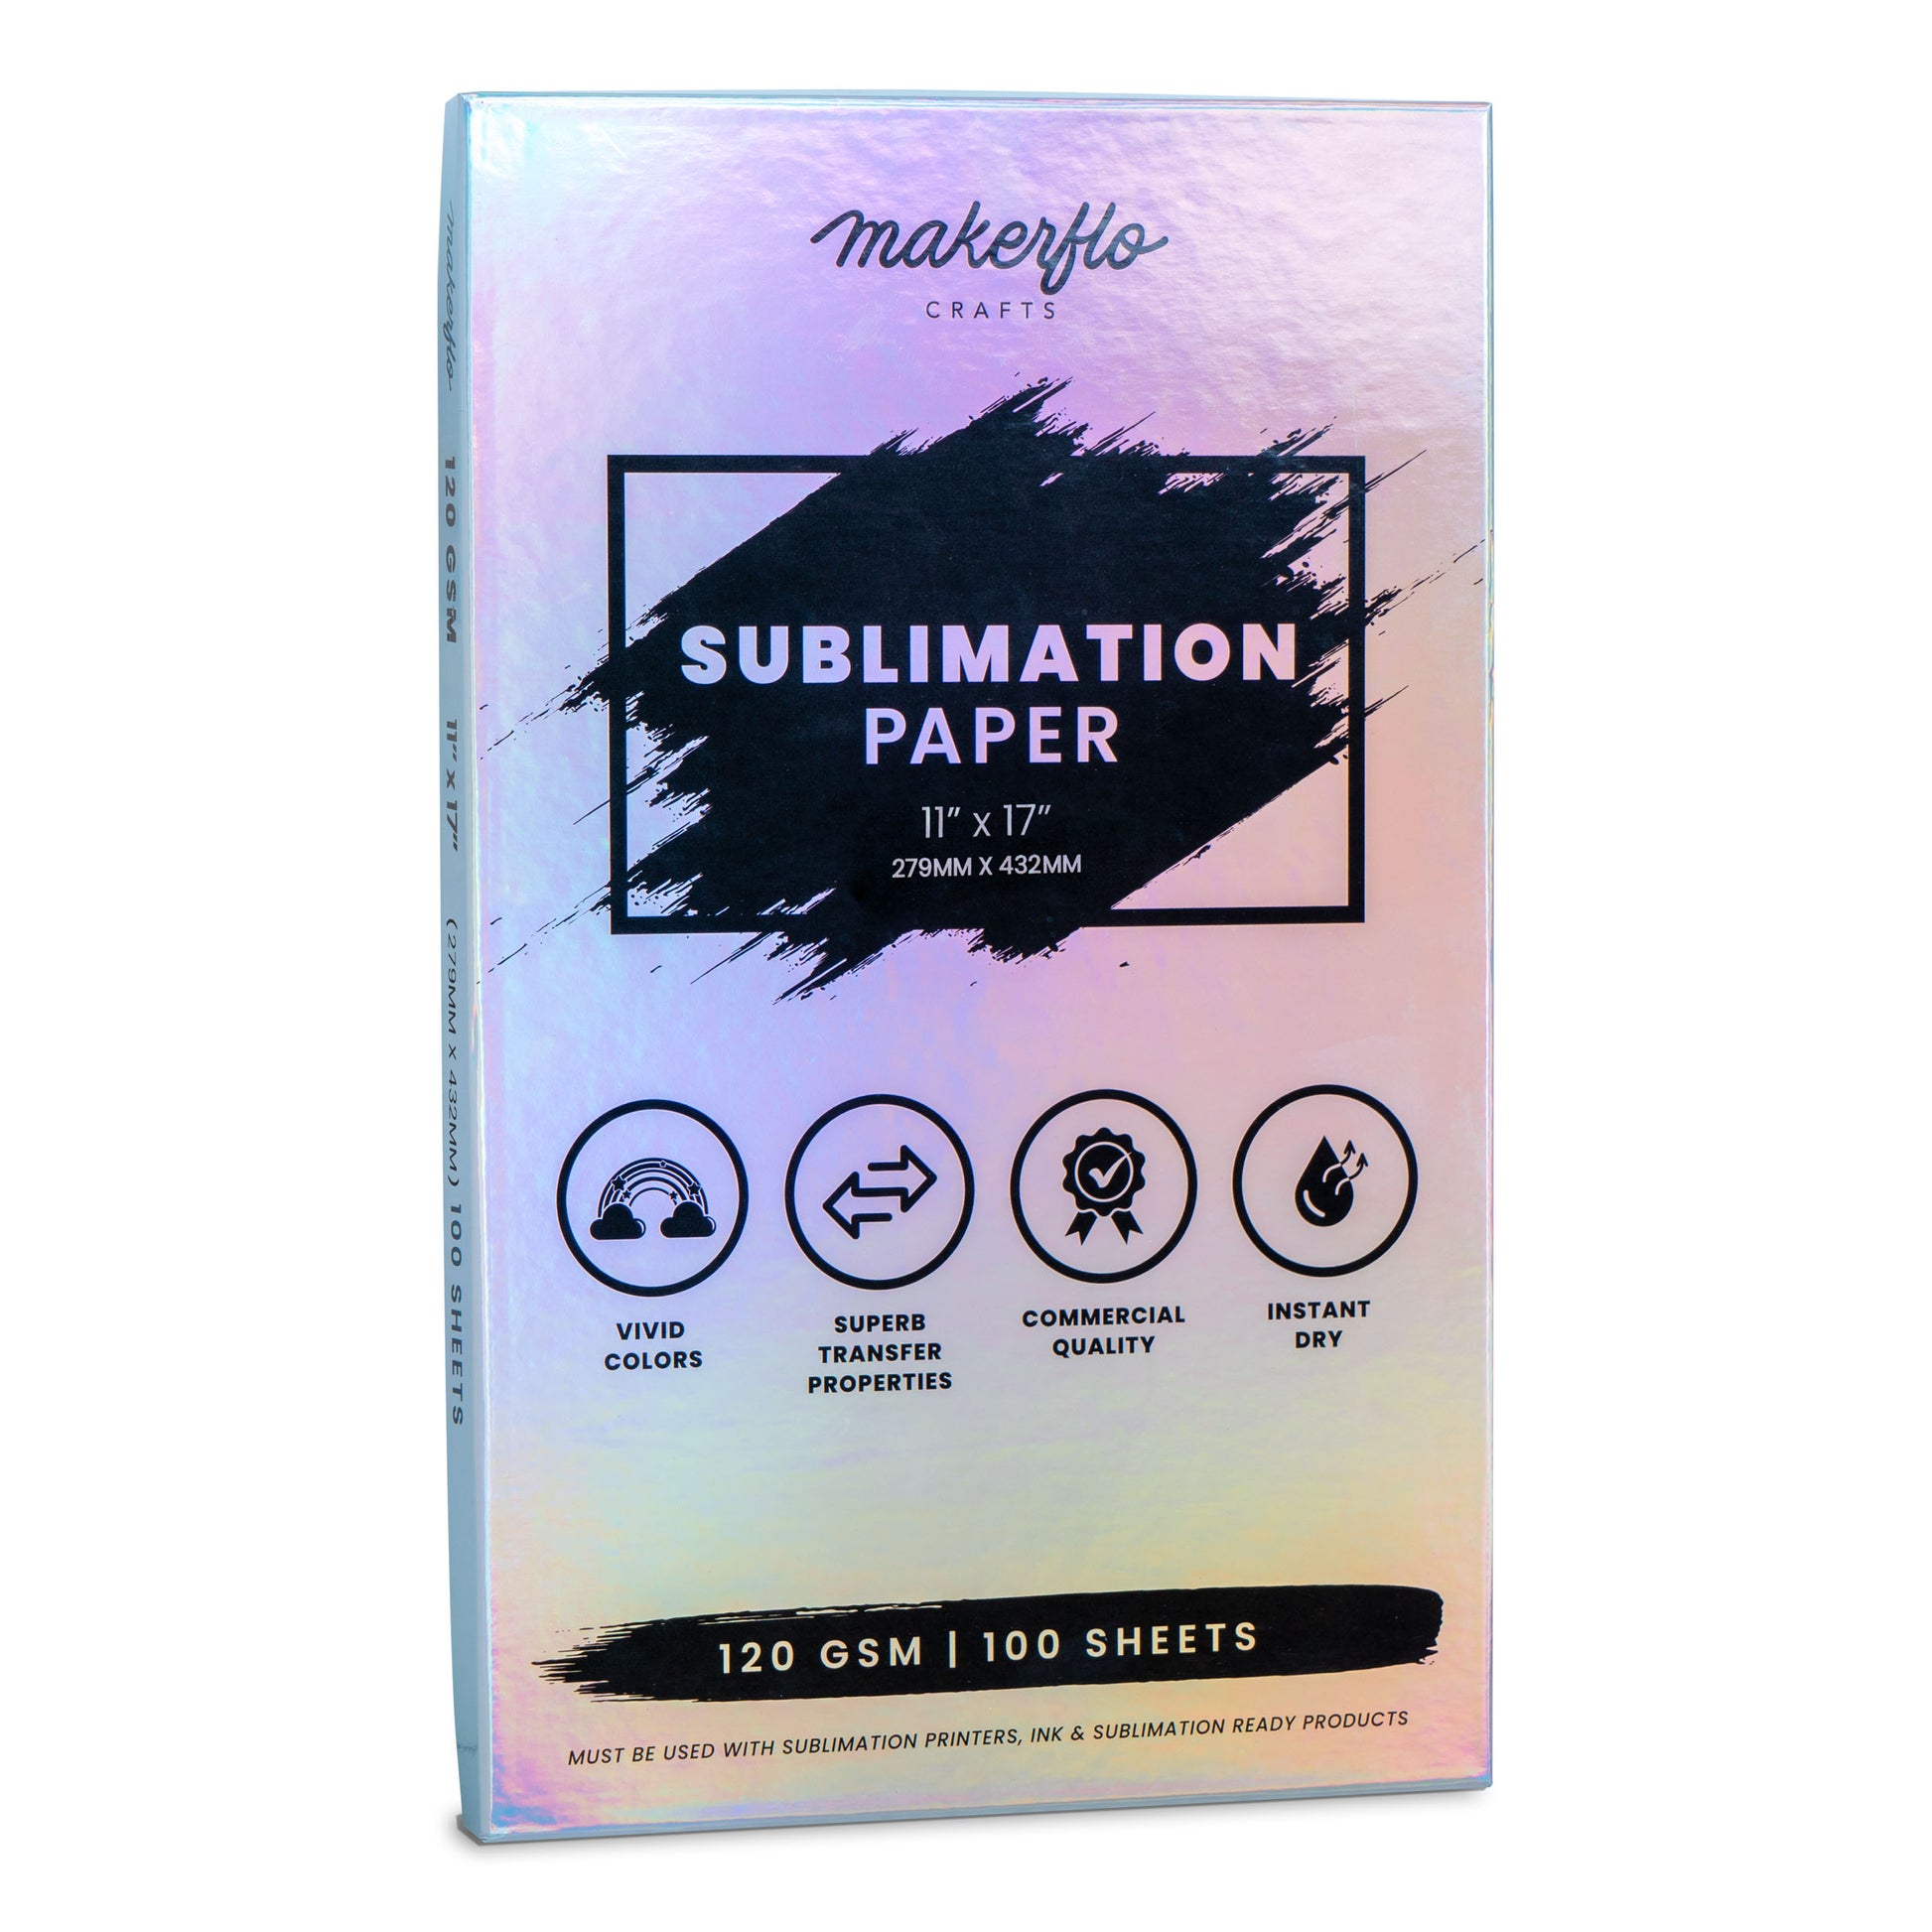 MakerFlo Crafts Sublimation Paper, Pack of 100 Sheets (8.5x11)